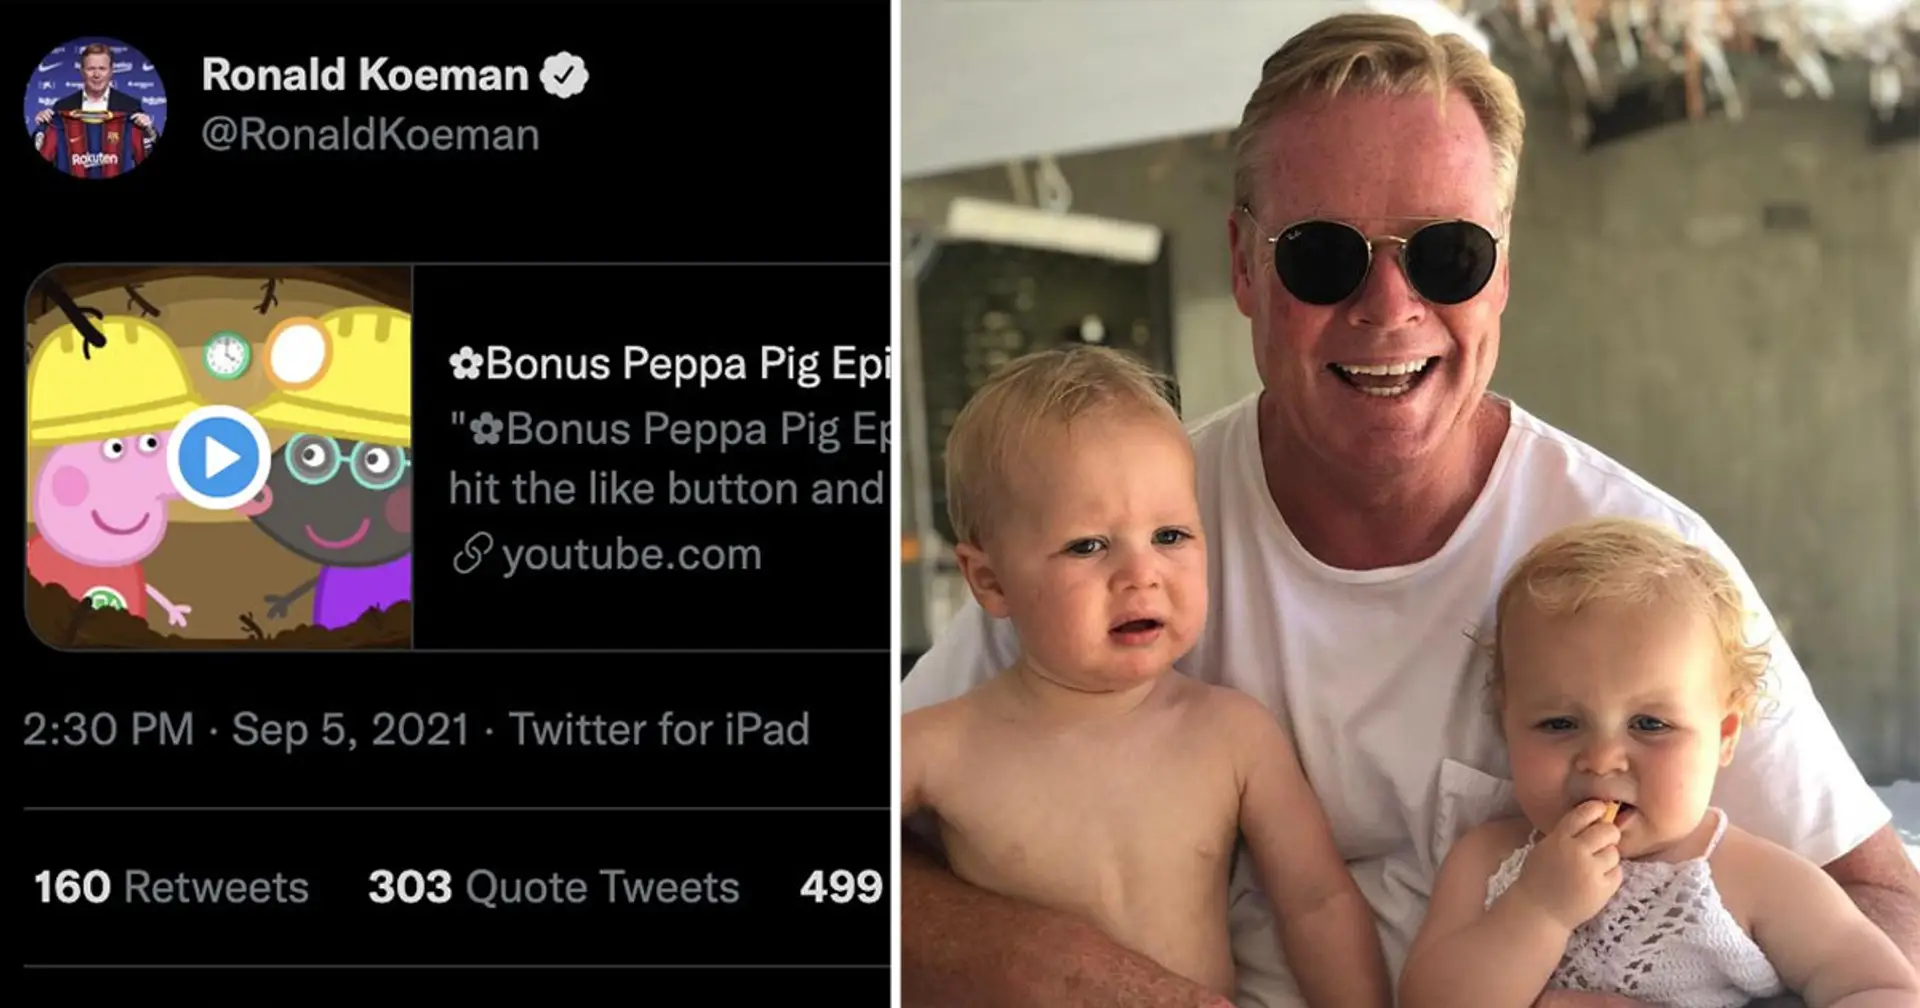 Koeman comes out to explain bizzare Peppa Pig tweet that confused fans